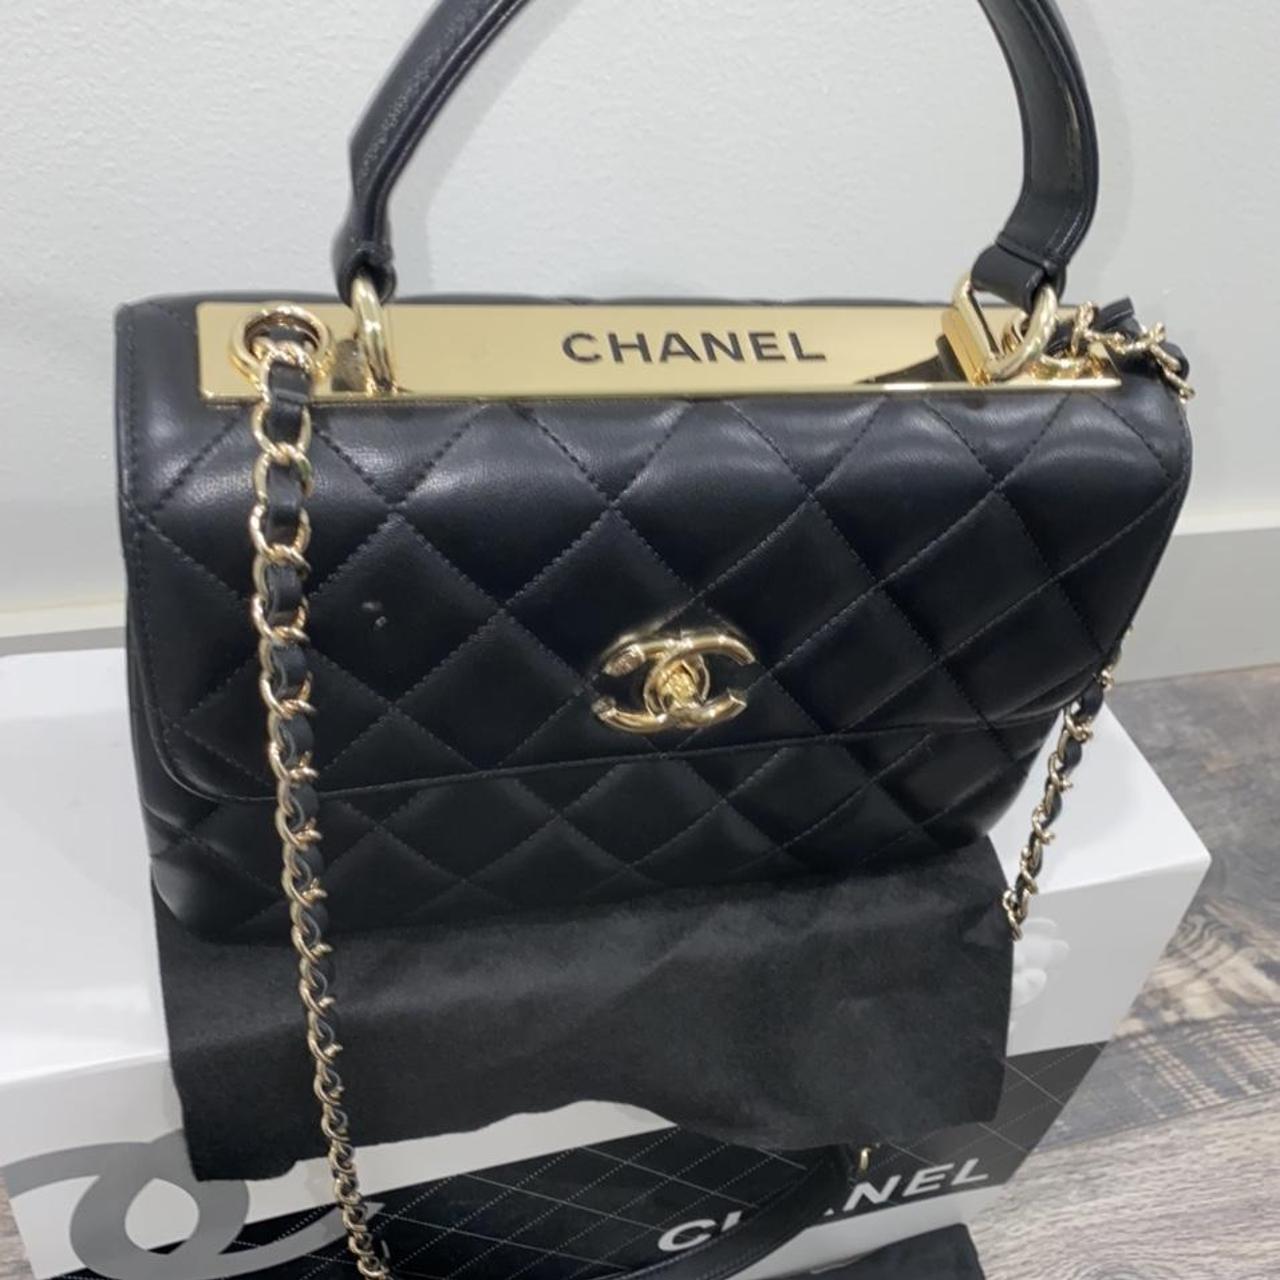 Cc top handle leather hand bag Worn but still in